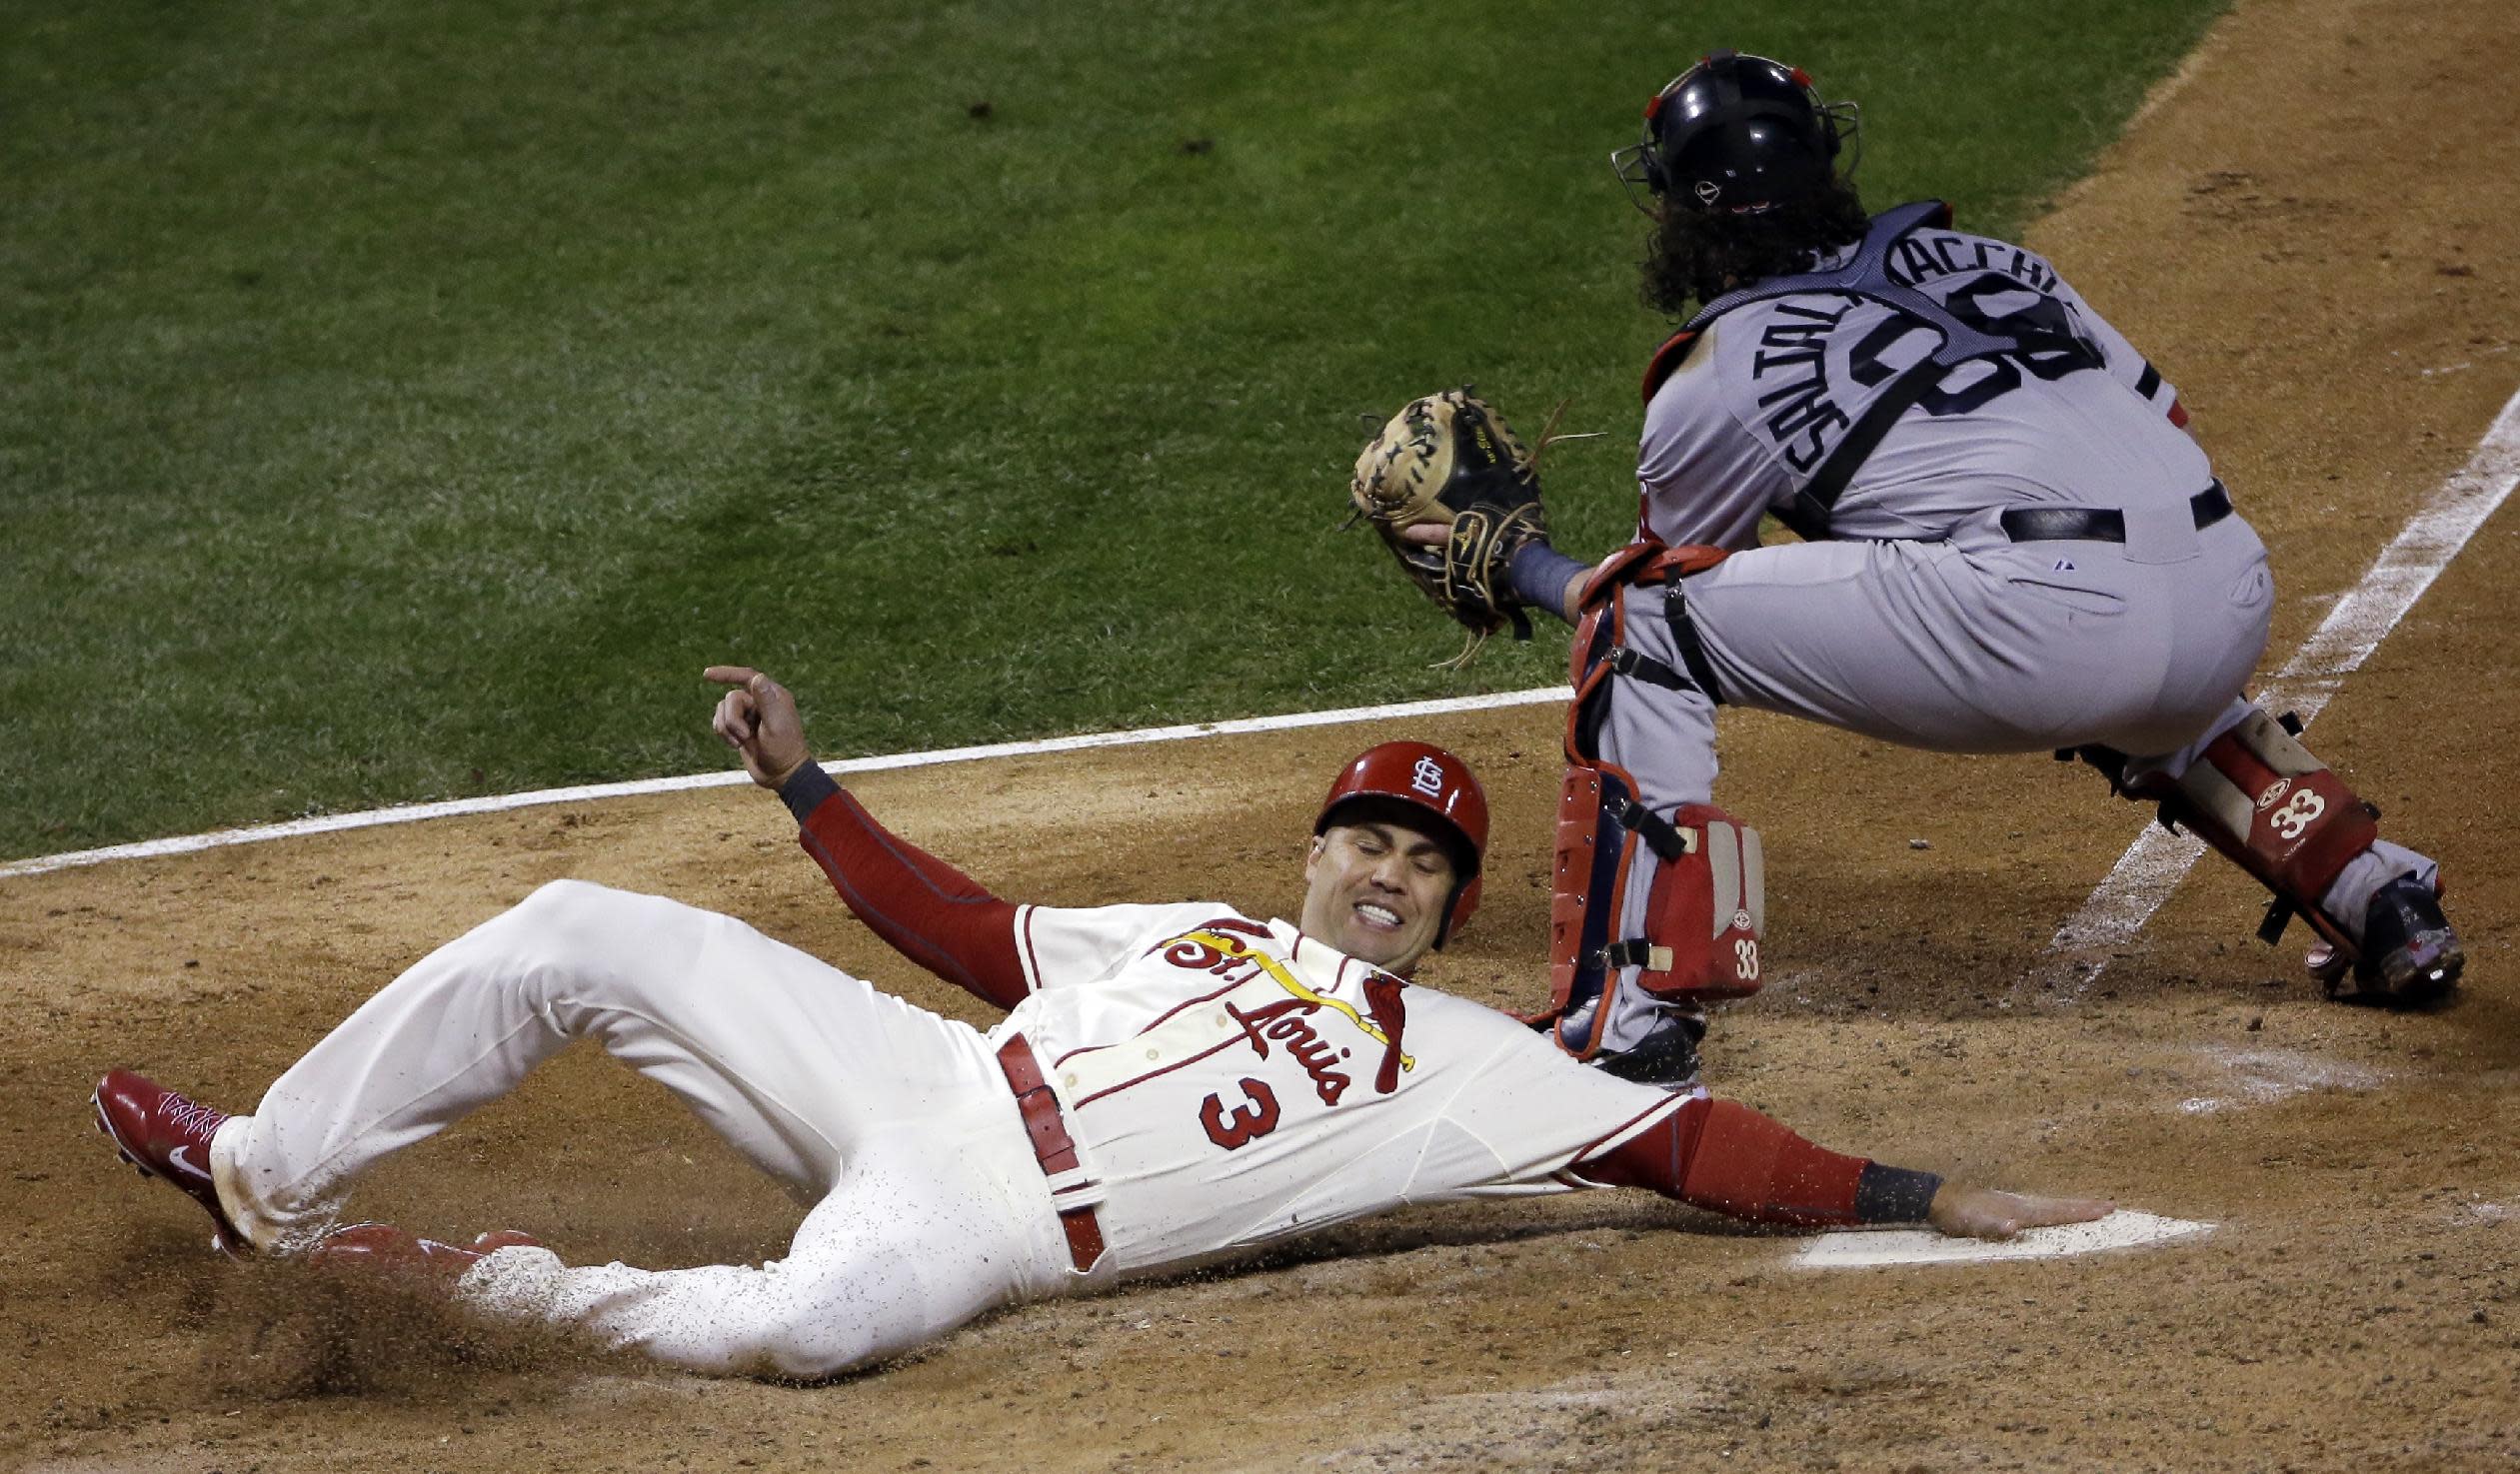 WORLD SERIES WATCH: Holliday puts Cards on top 4-2